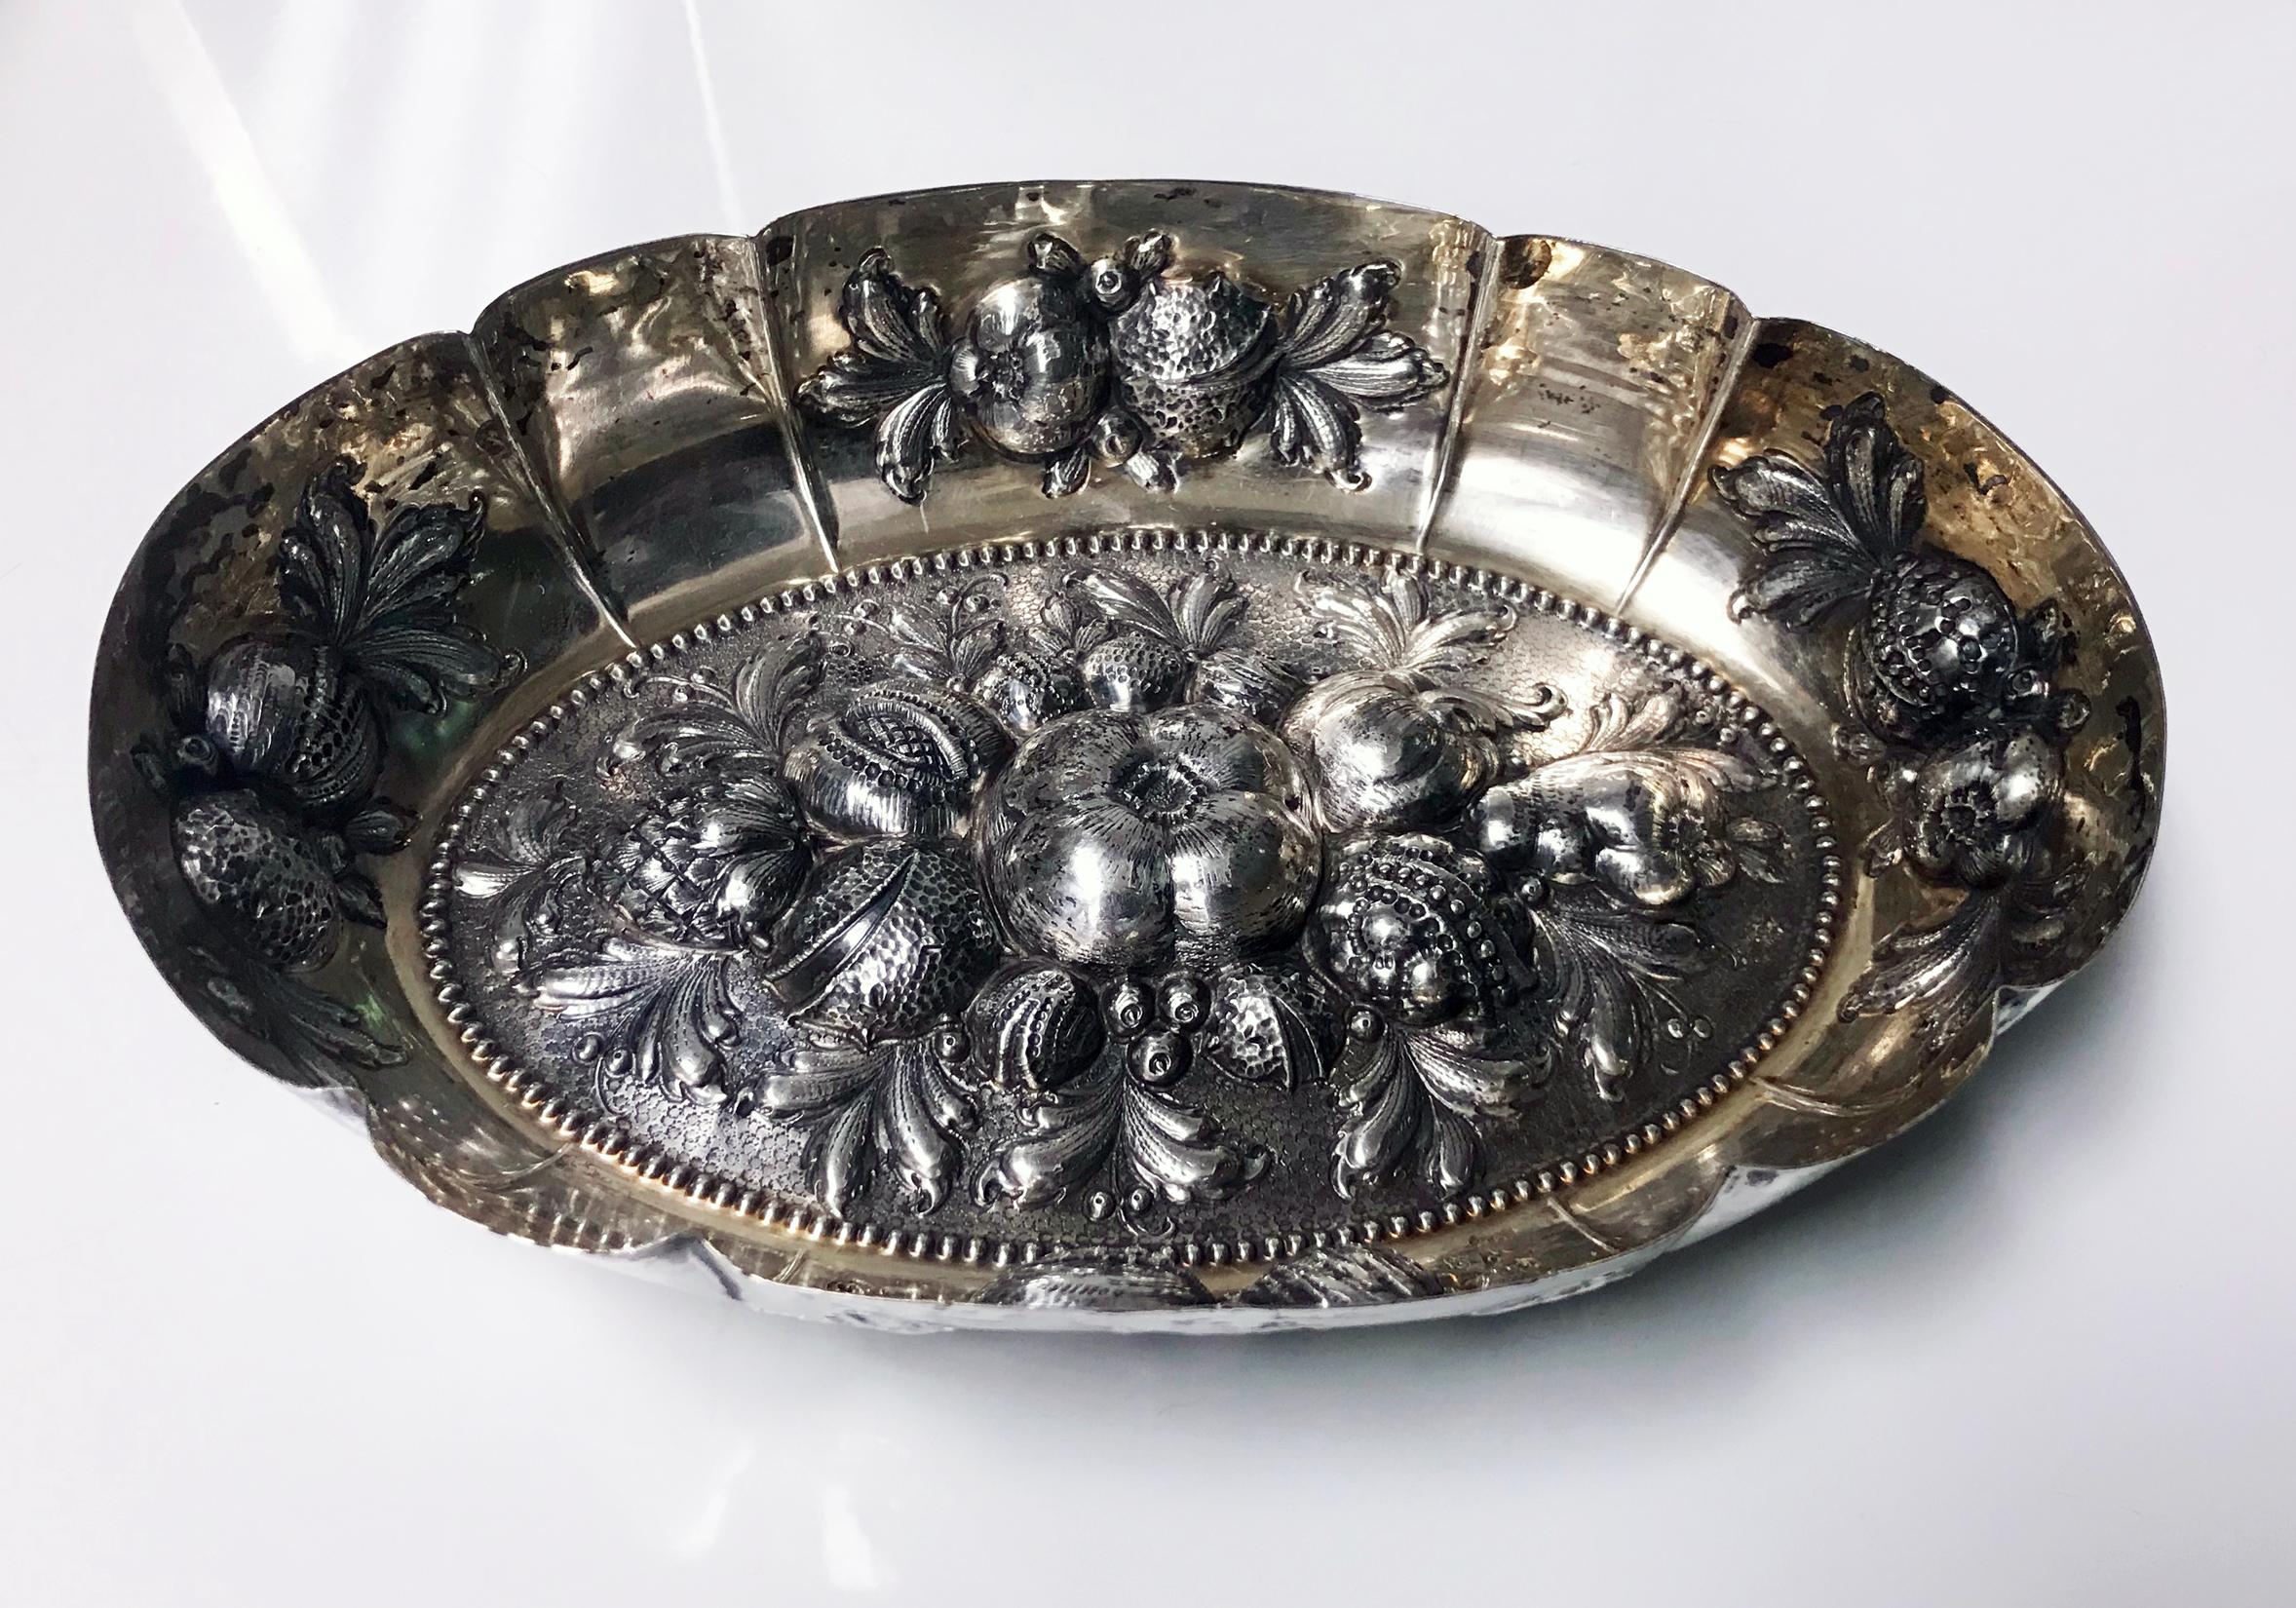 Antique silver parcel gilt fruit dish, Germany, circa 1880. Oval form in the style of the 16th-17th century silver, embossed with scrolling foliage and fruits. The hand embossed decoration is very fine, the dish with 13 Loth mark and L in script,